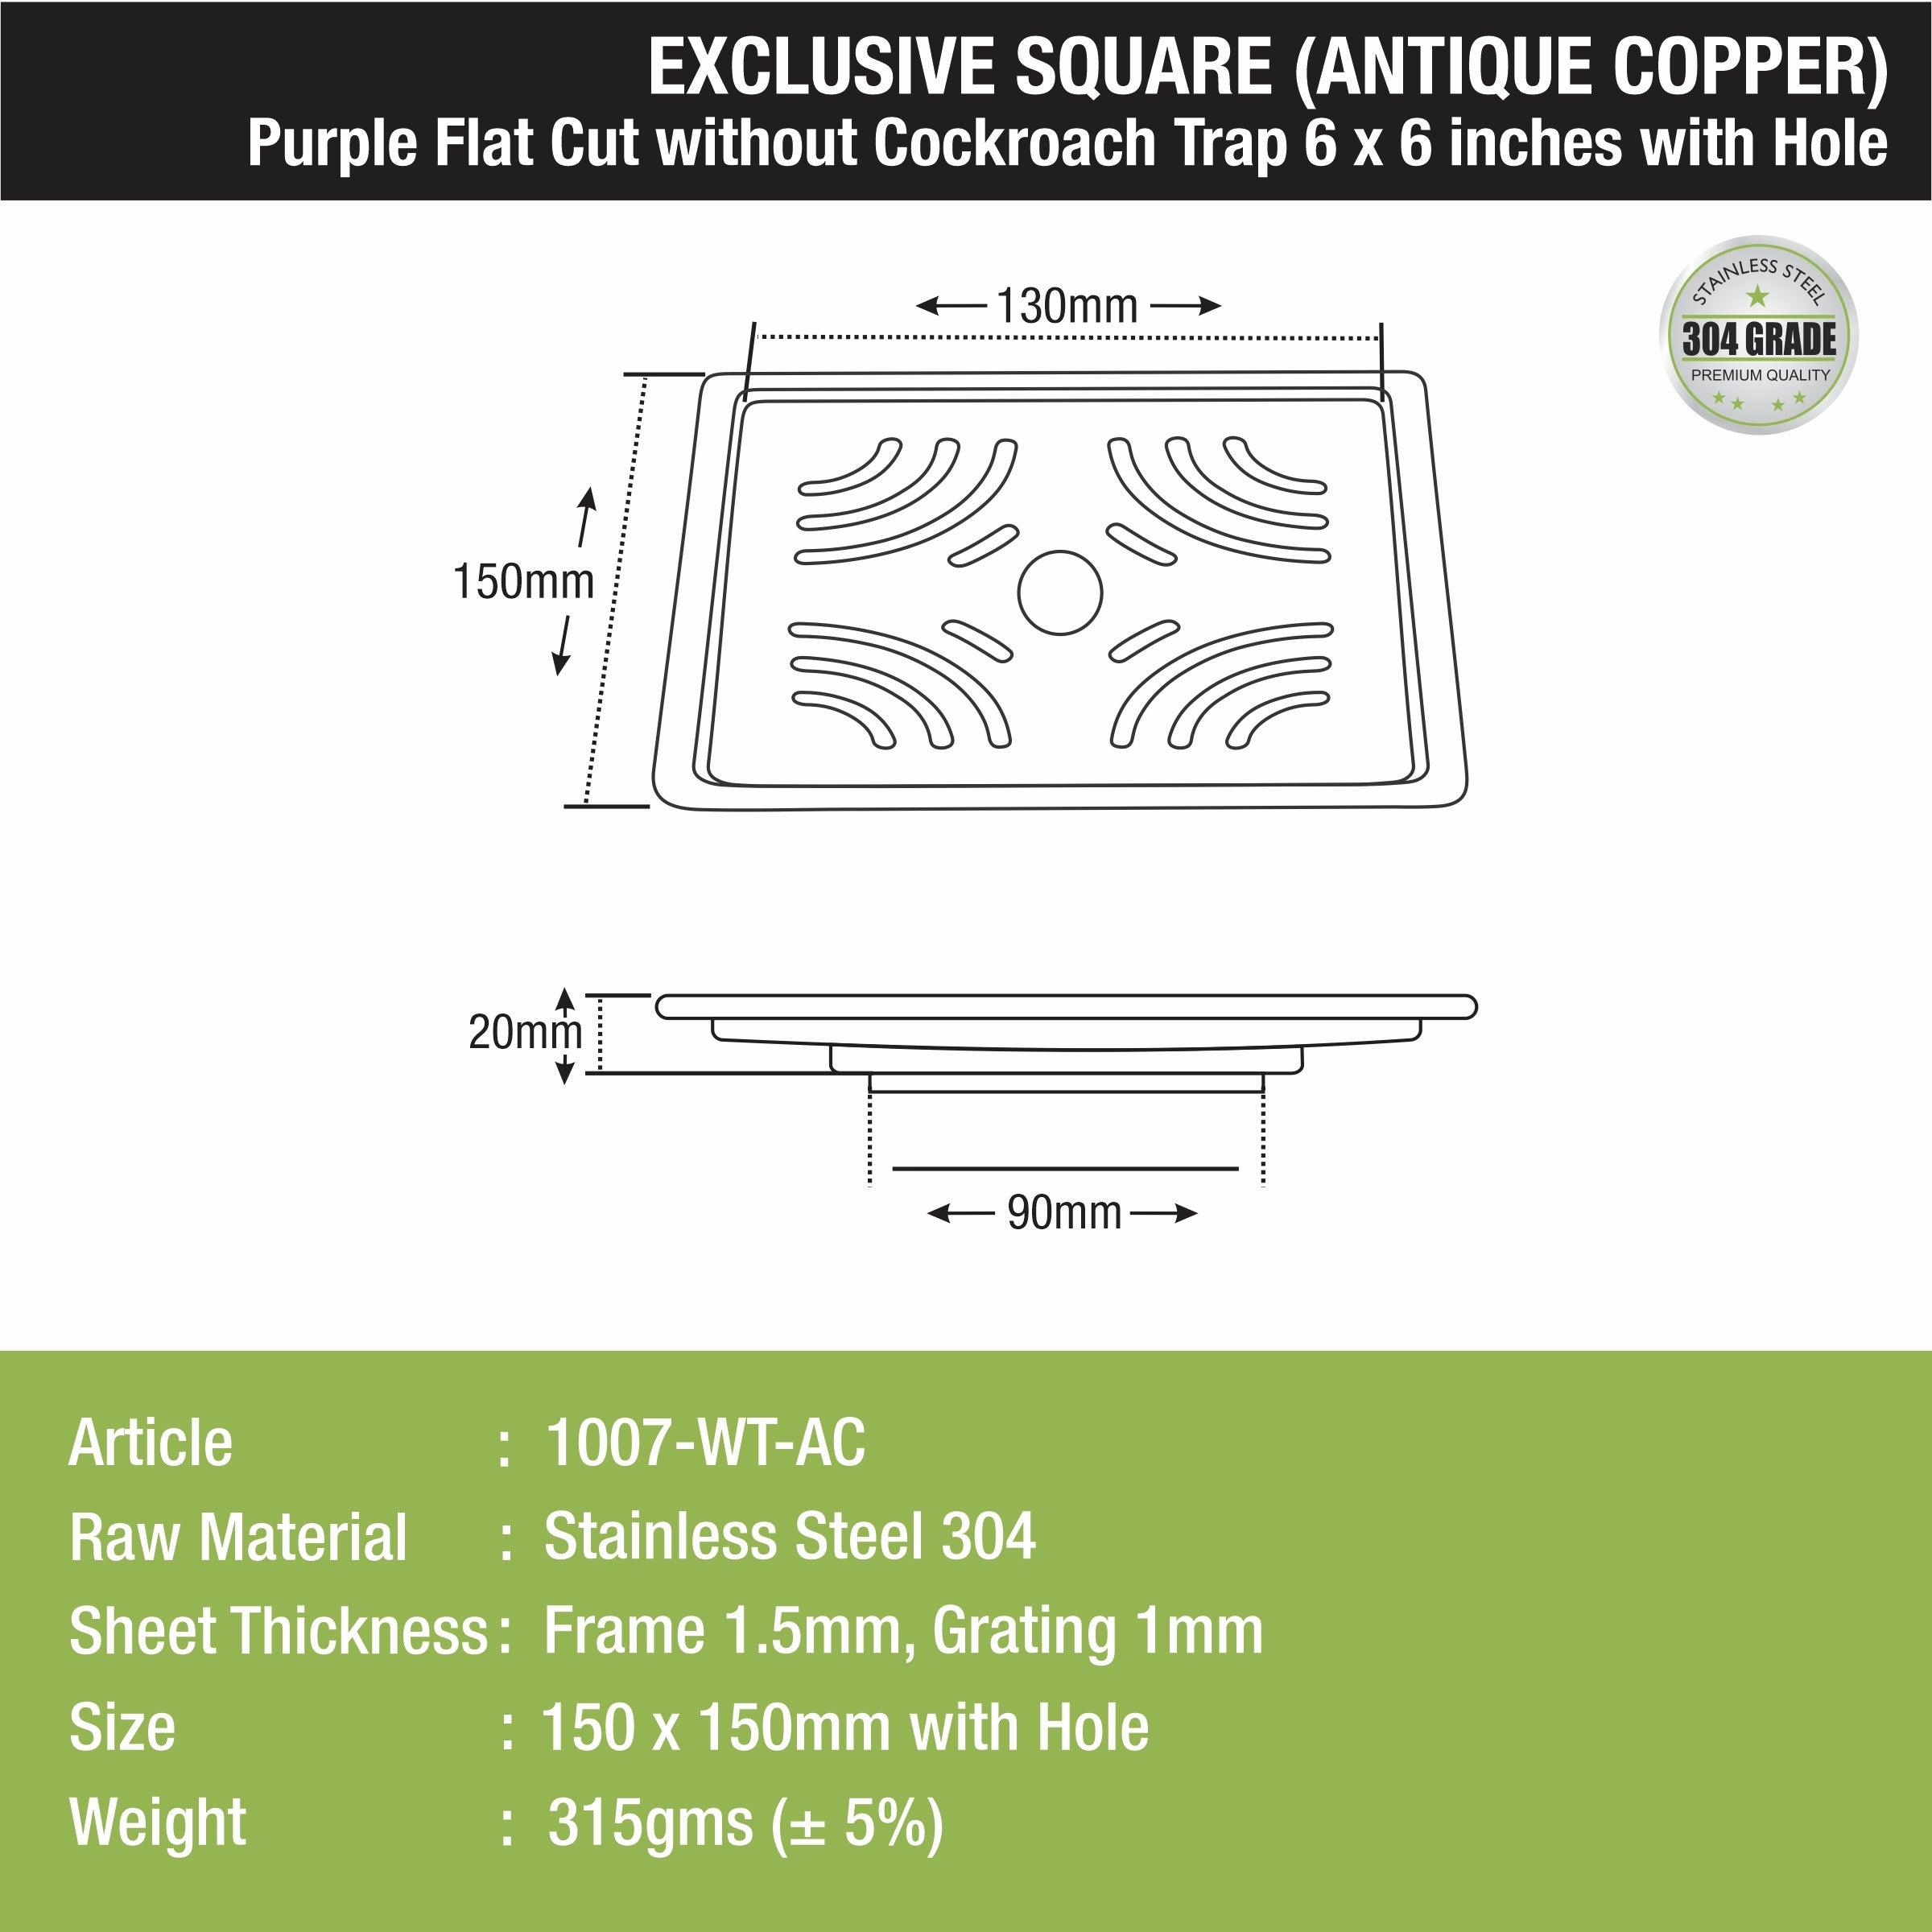 Purple Exclusive Square Flat Cut Floor Drain in Antique Copper PVD Coating (6 x 6 Inches) with Hole sizes and dimensions